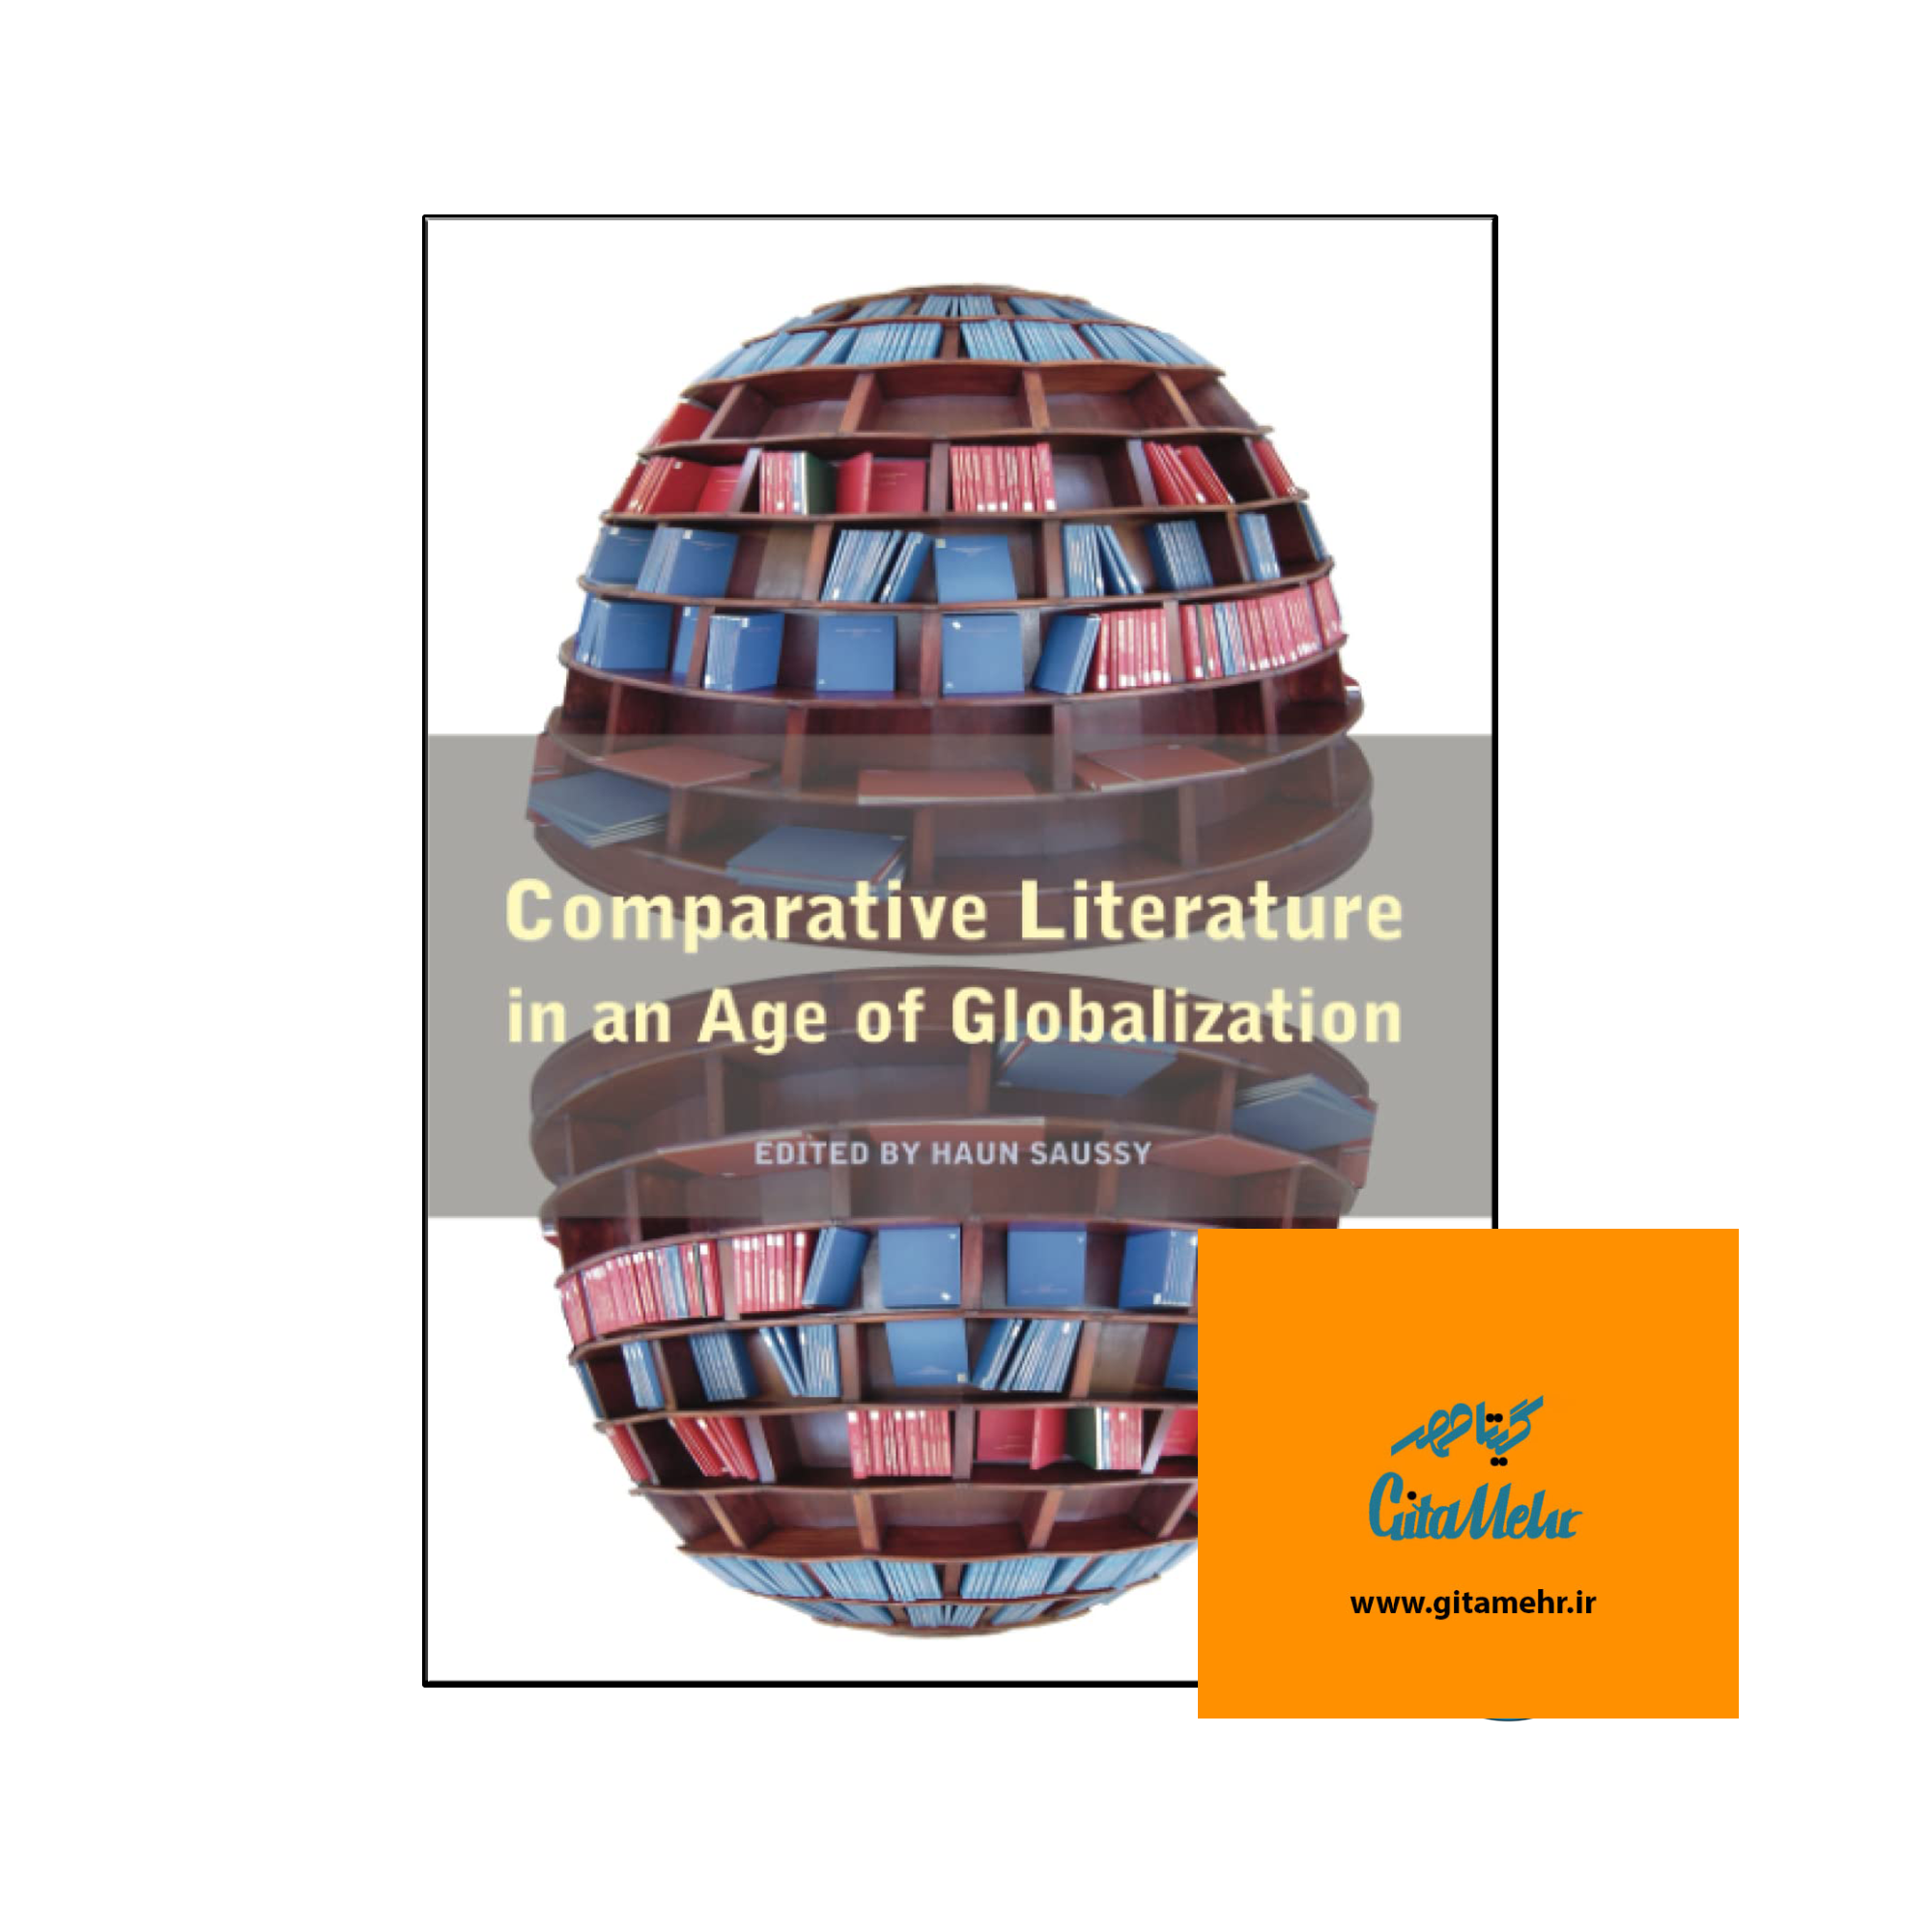 daa9d8aad8a7d8a8 comparative literature in an age of globalization 65ed8b142499a